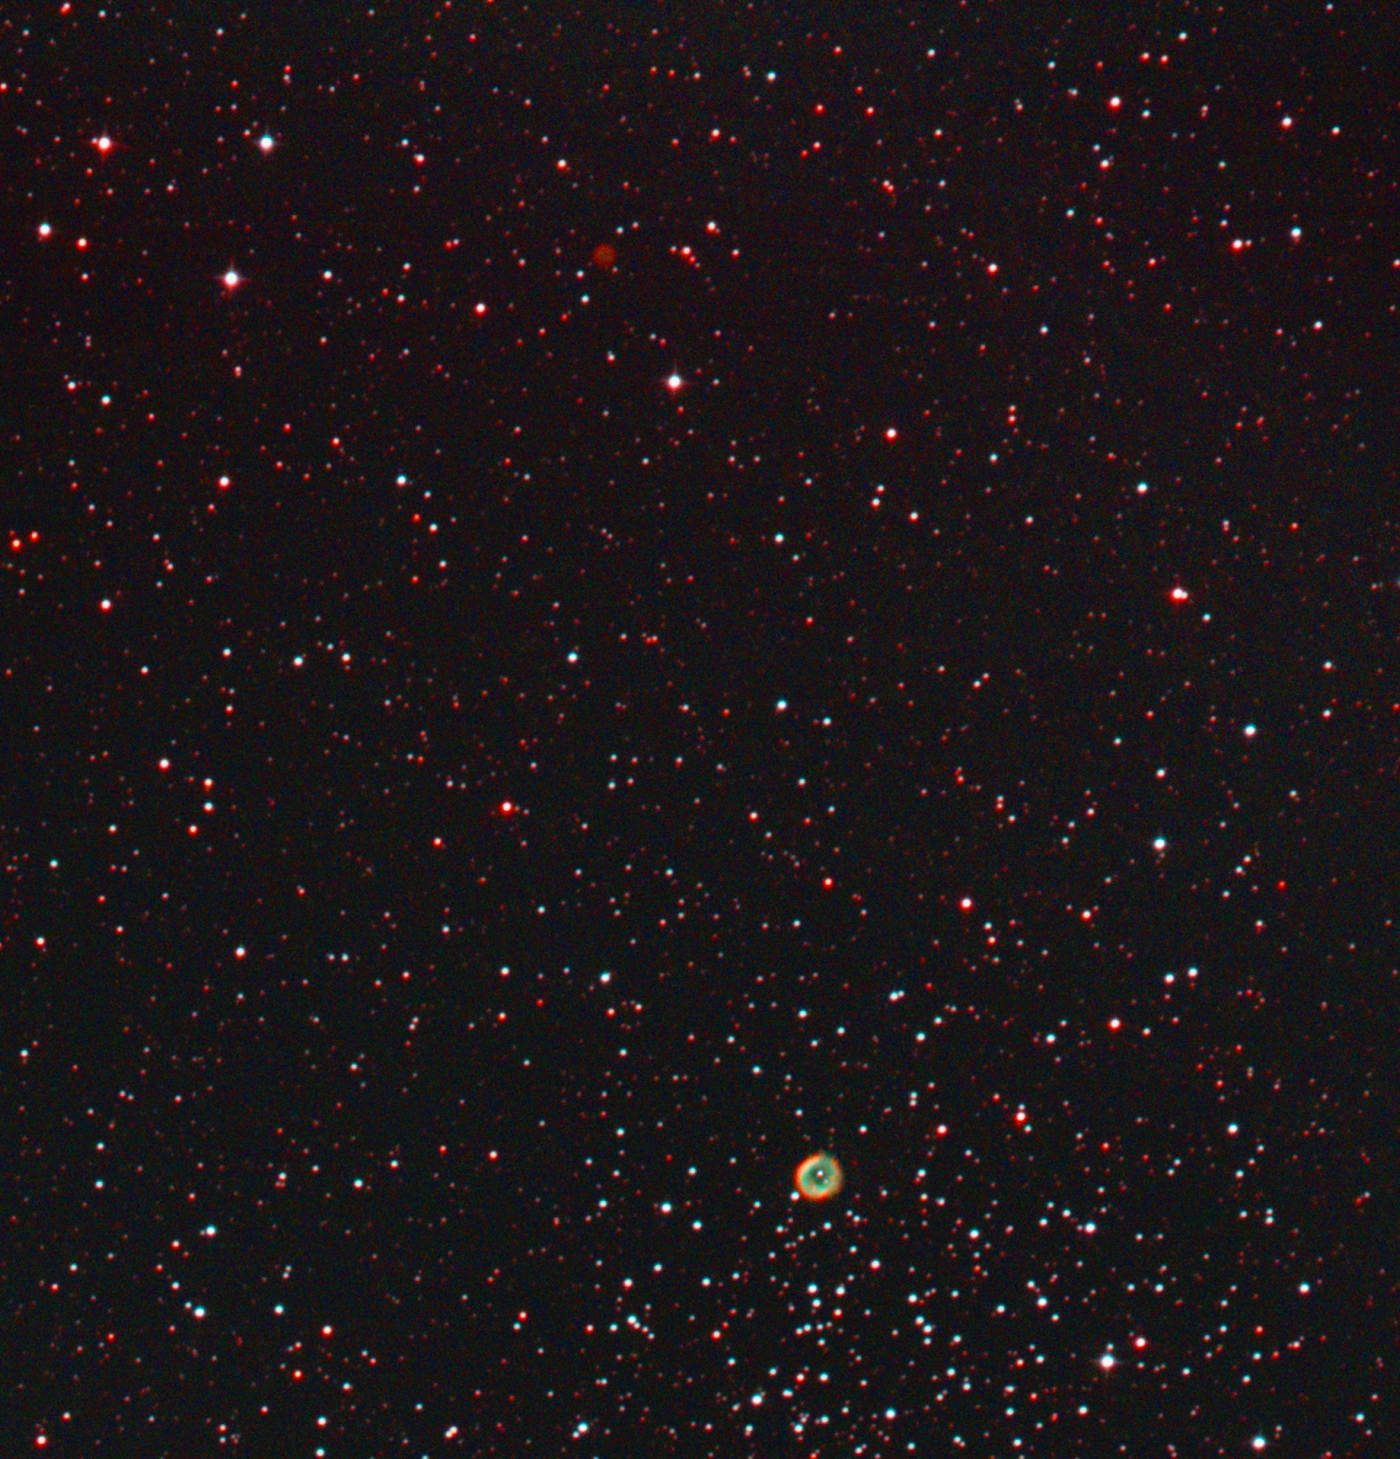 PN NGC 2438 (in M46; below) + PN Minkowski 1-18; (red dot; above) from February 12th, 2022; 10x10 min; 8" f/4 newtonian; mod. Canon 600d, 2 nebula filters in imagetrain;